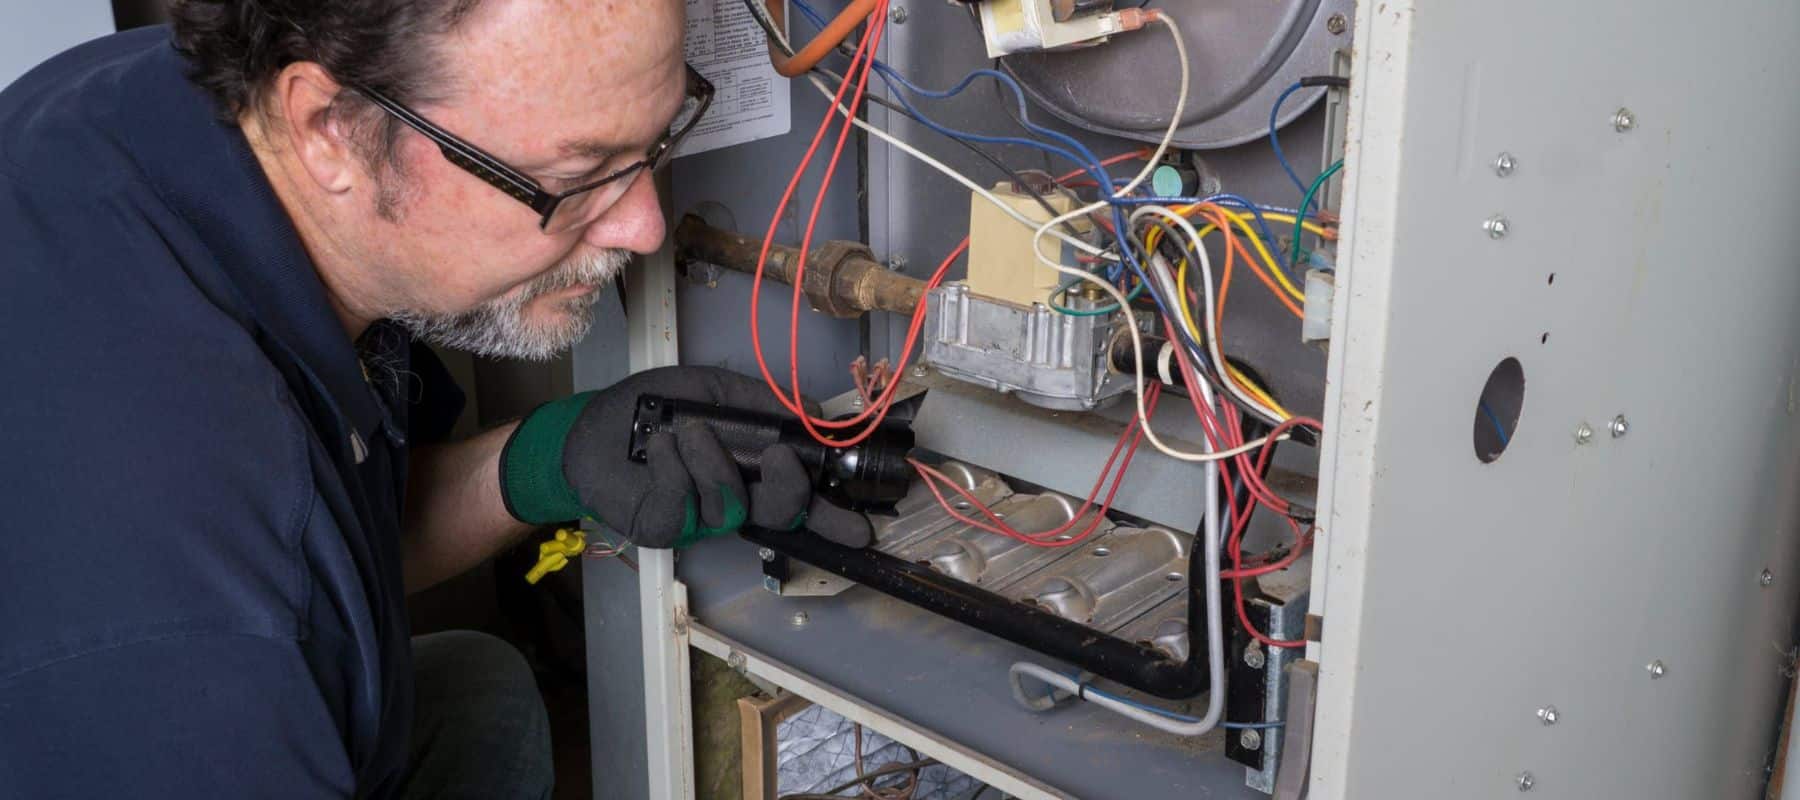 technician performing heater repair on a furnace inside a home